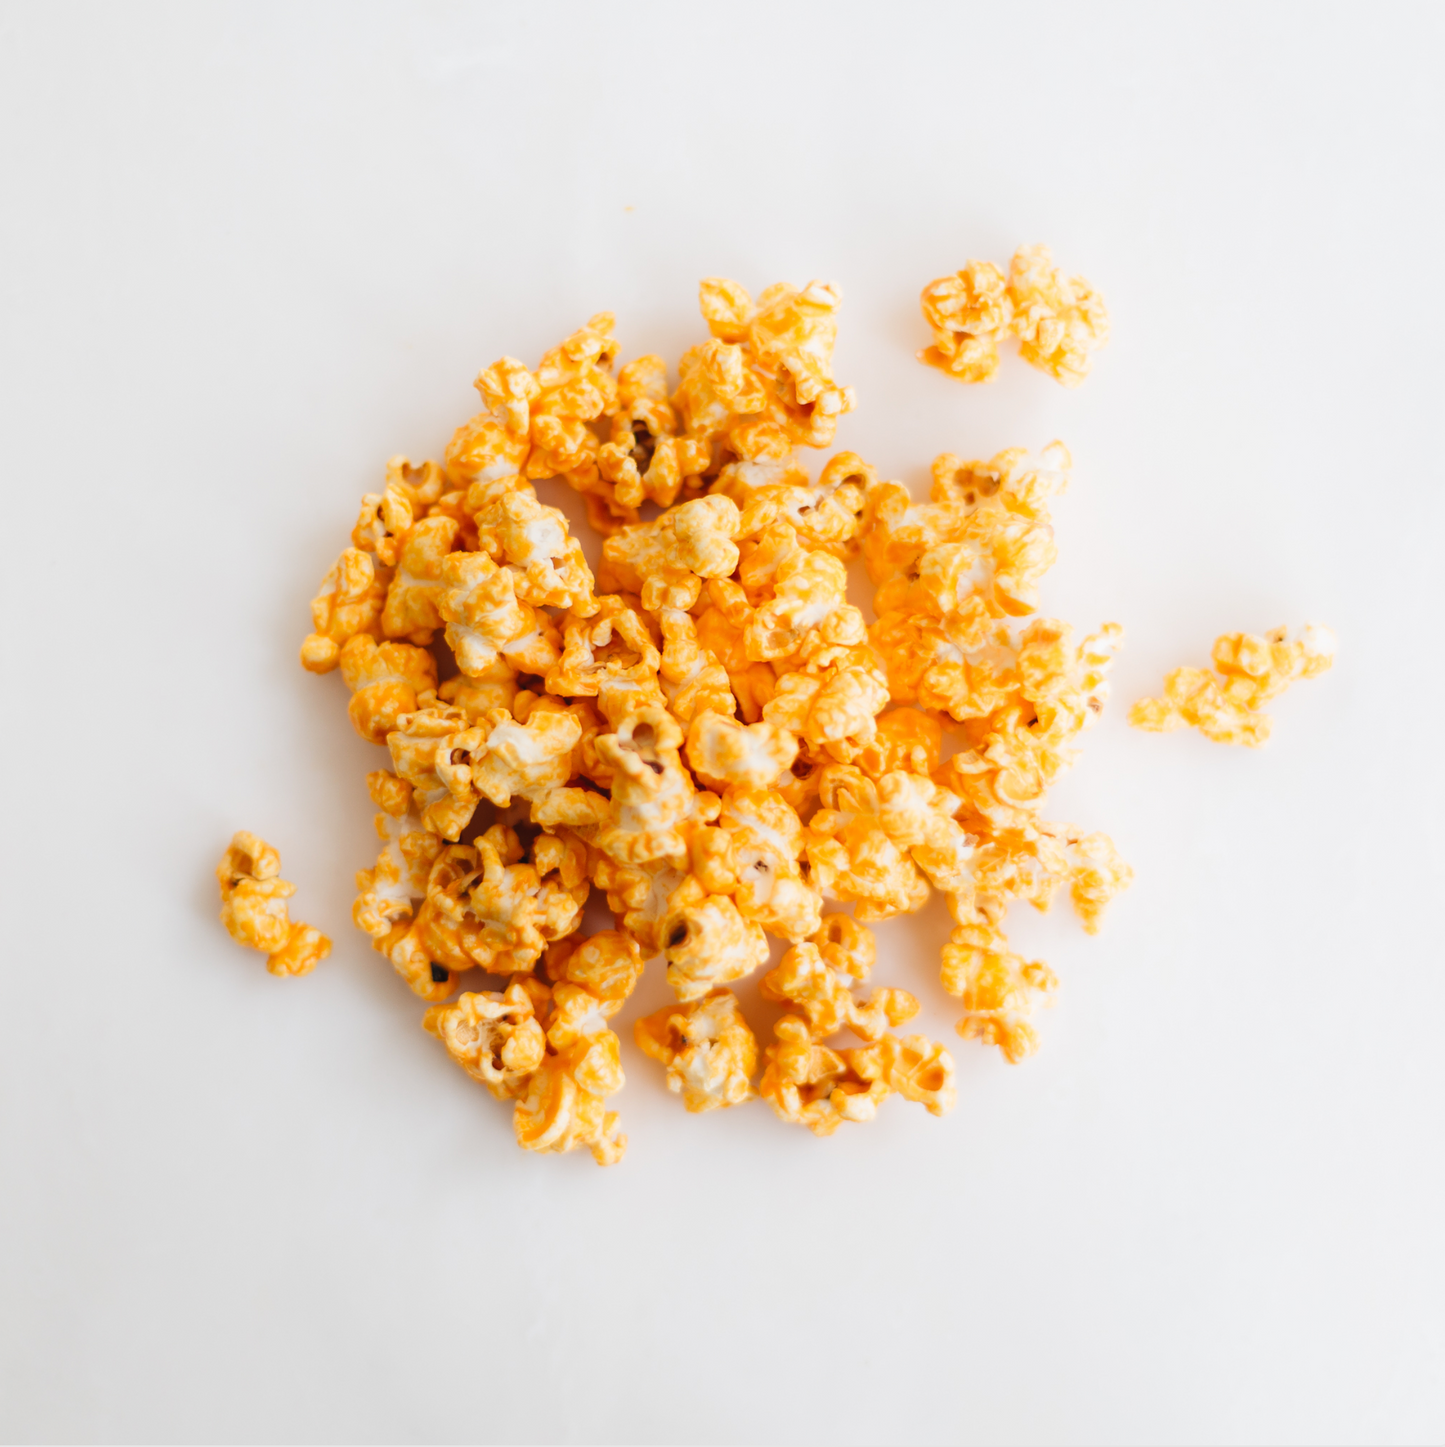 A true classic popcorn. Our Cheddar is creamy with a perfect crunchy popcorn. Get this wonderful tasting popcorn now. Order it online or stop in Popnotch Goods to get the best tasting cheddar popcorn. 